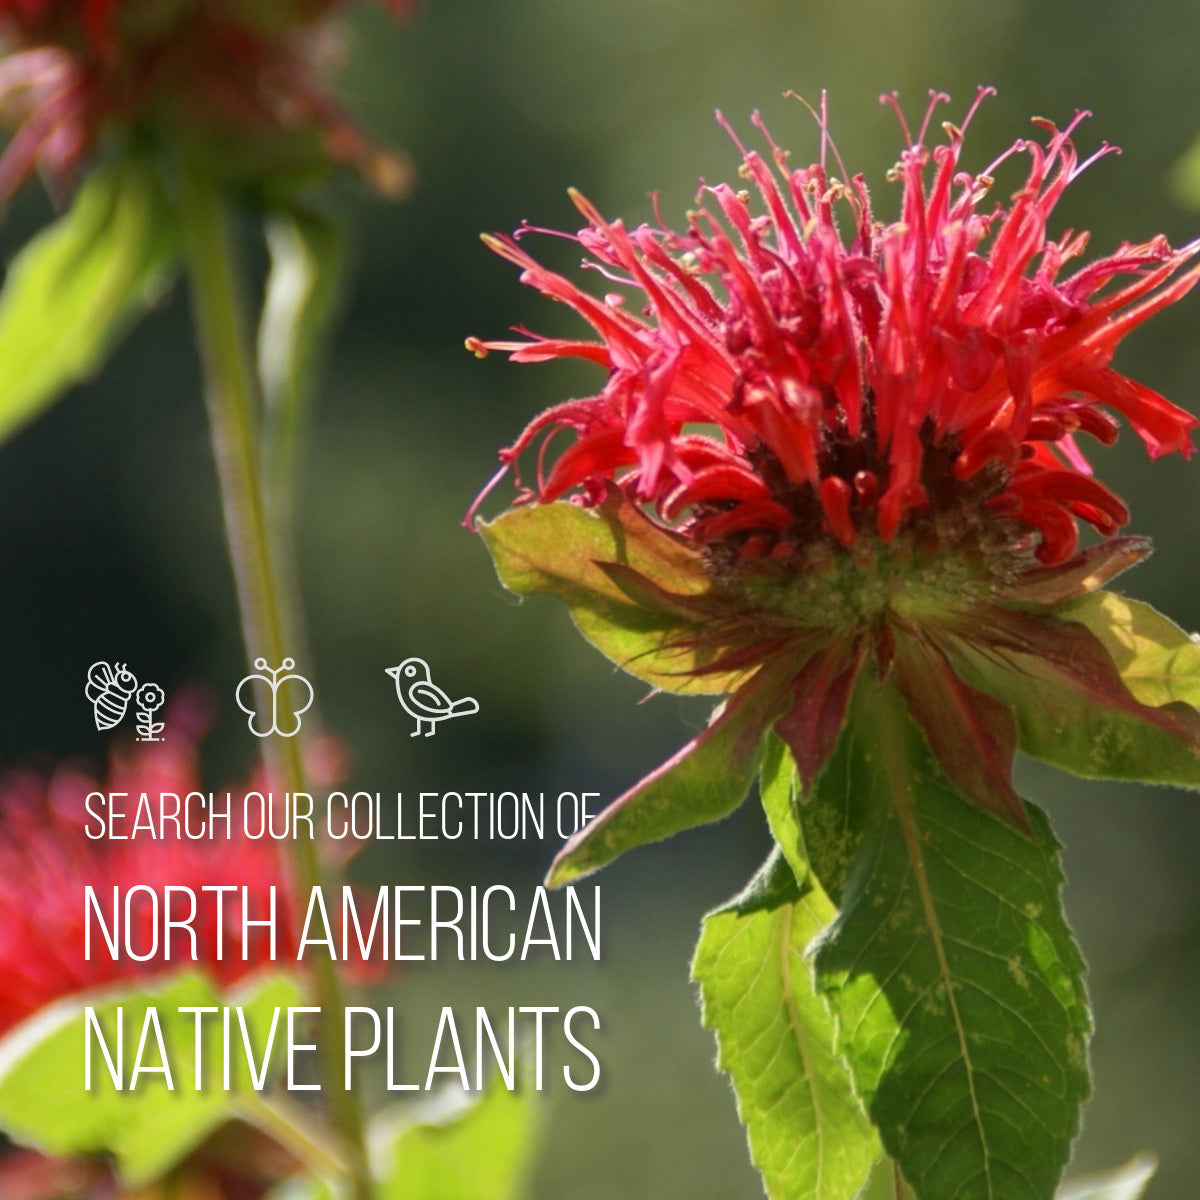 Search our collection of North American native plants.